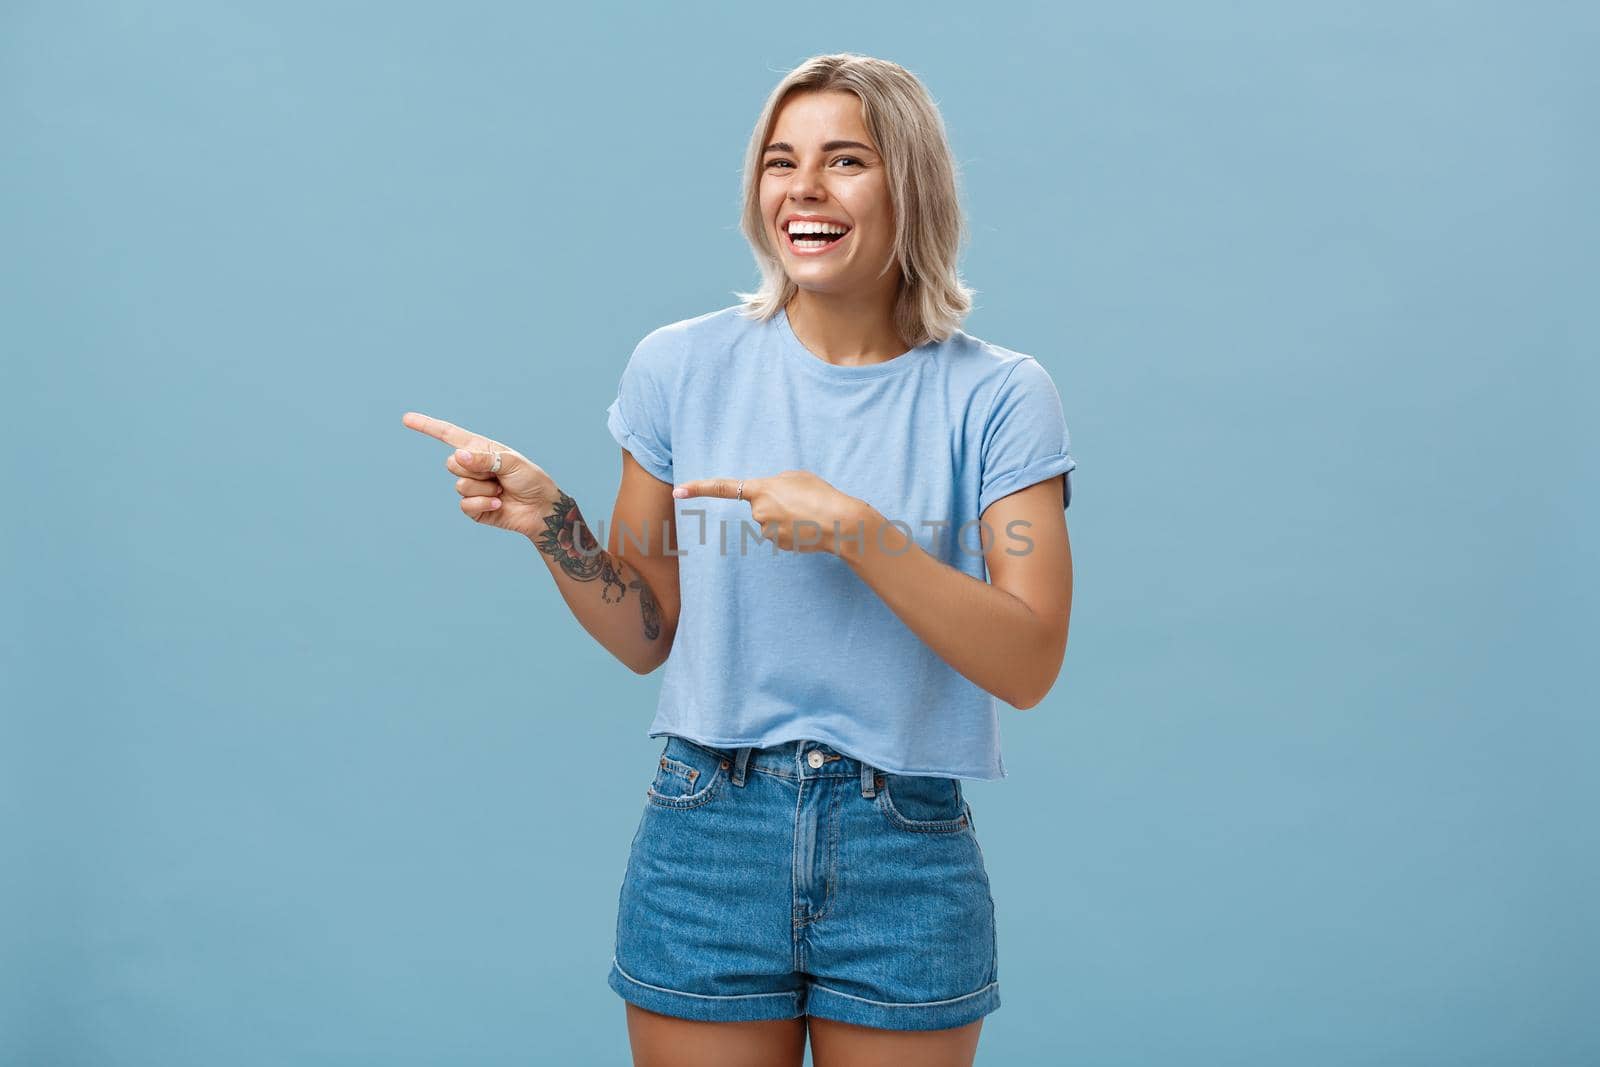 Charismatic joyful attractive athletic woman with fair hair and tanned skin laughing out loud with amusement pointing left and gazing at camera happily standing entertained over blue wall. Copy space